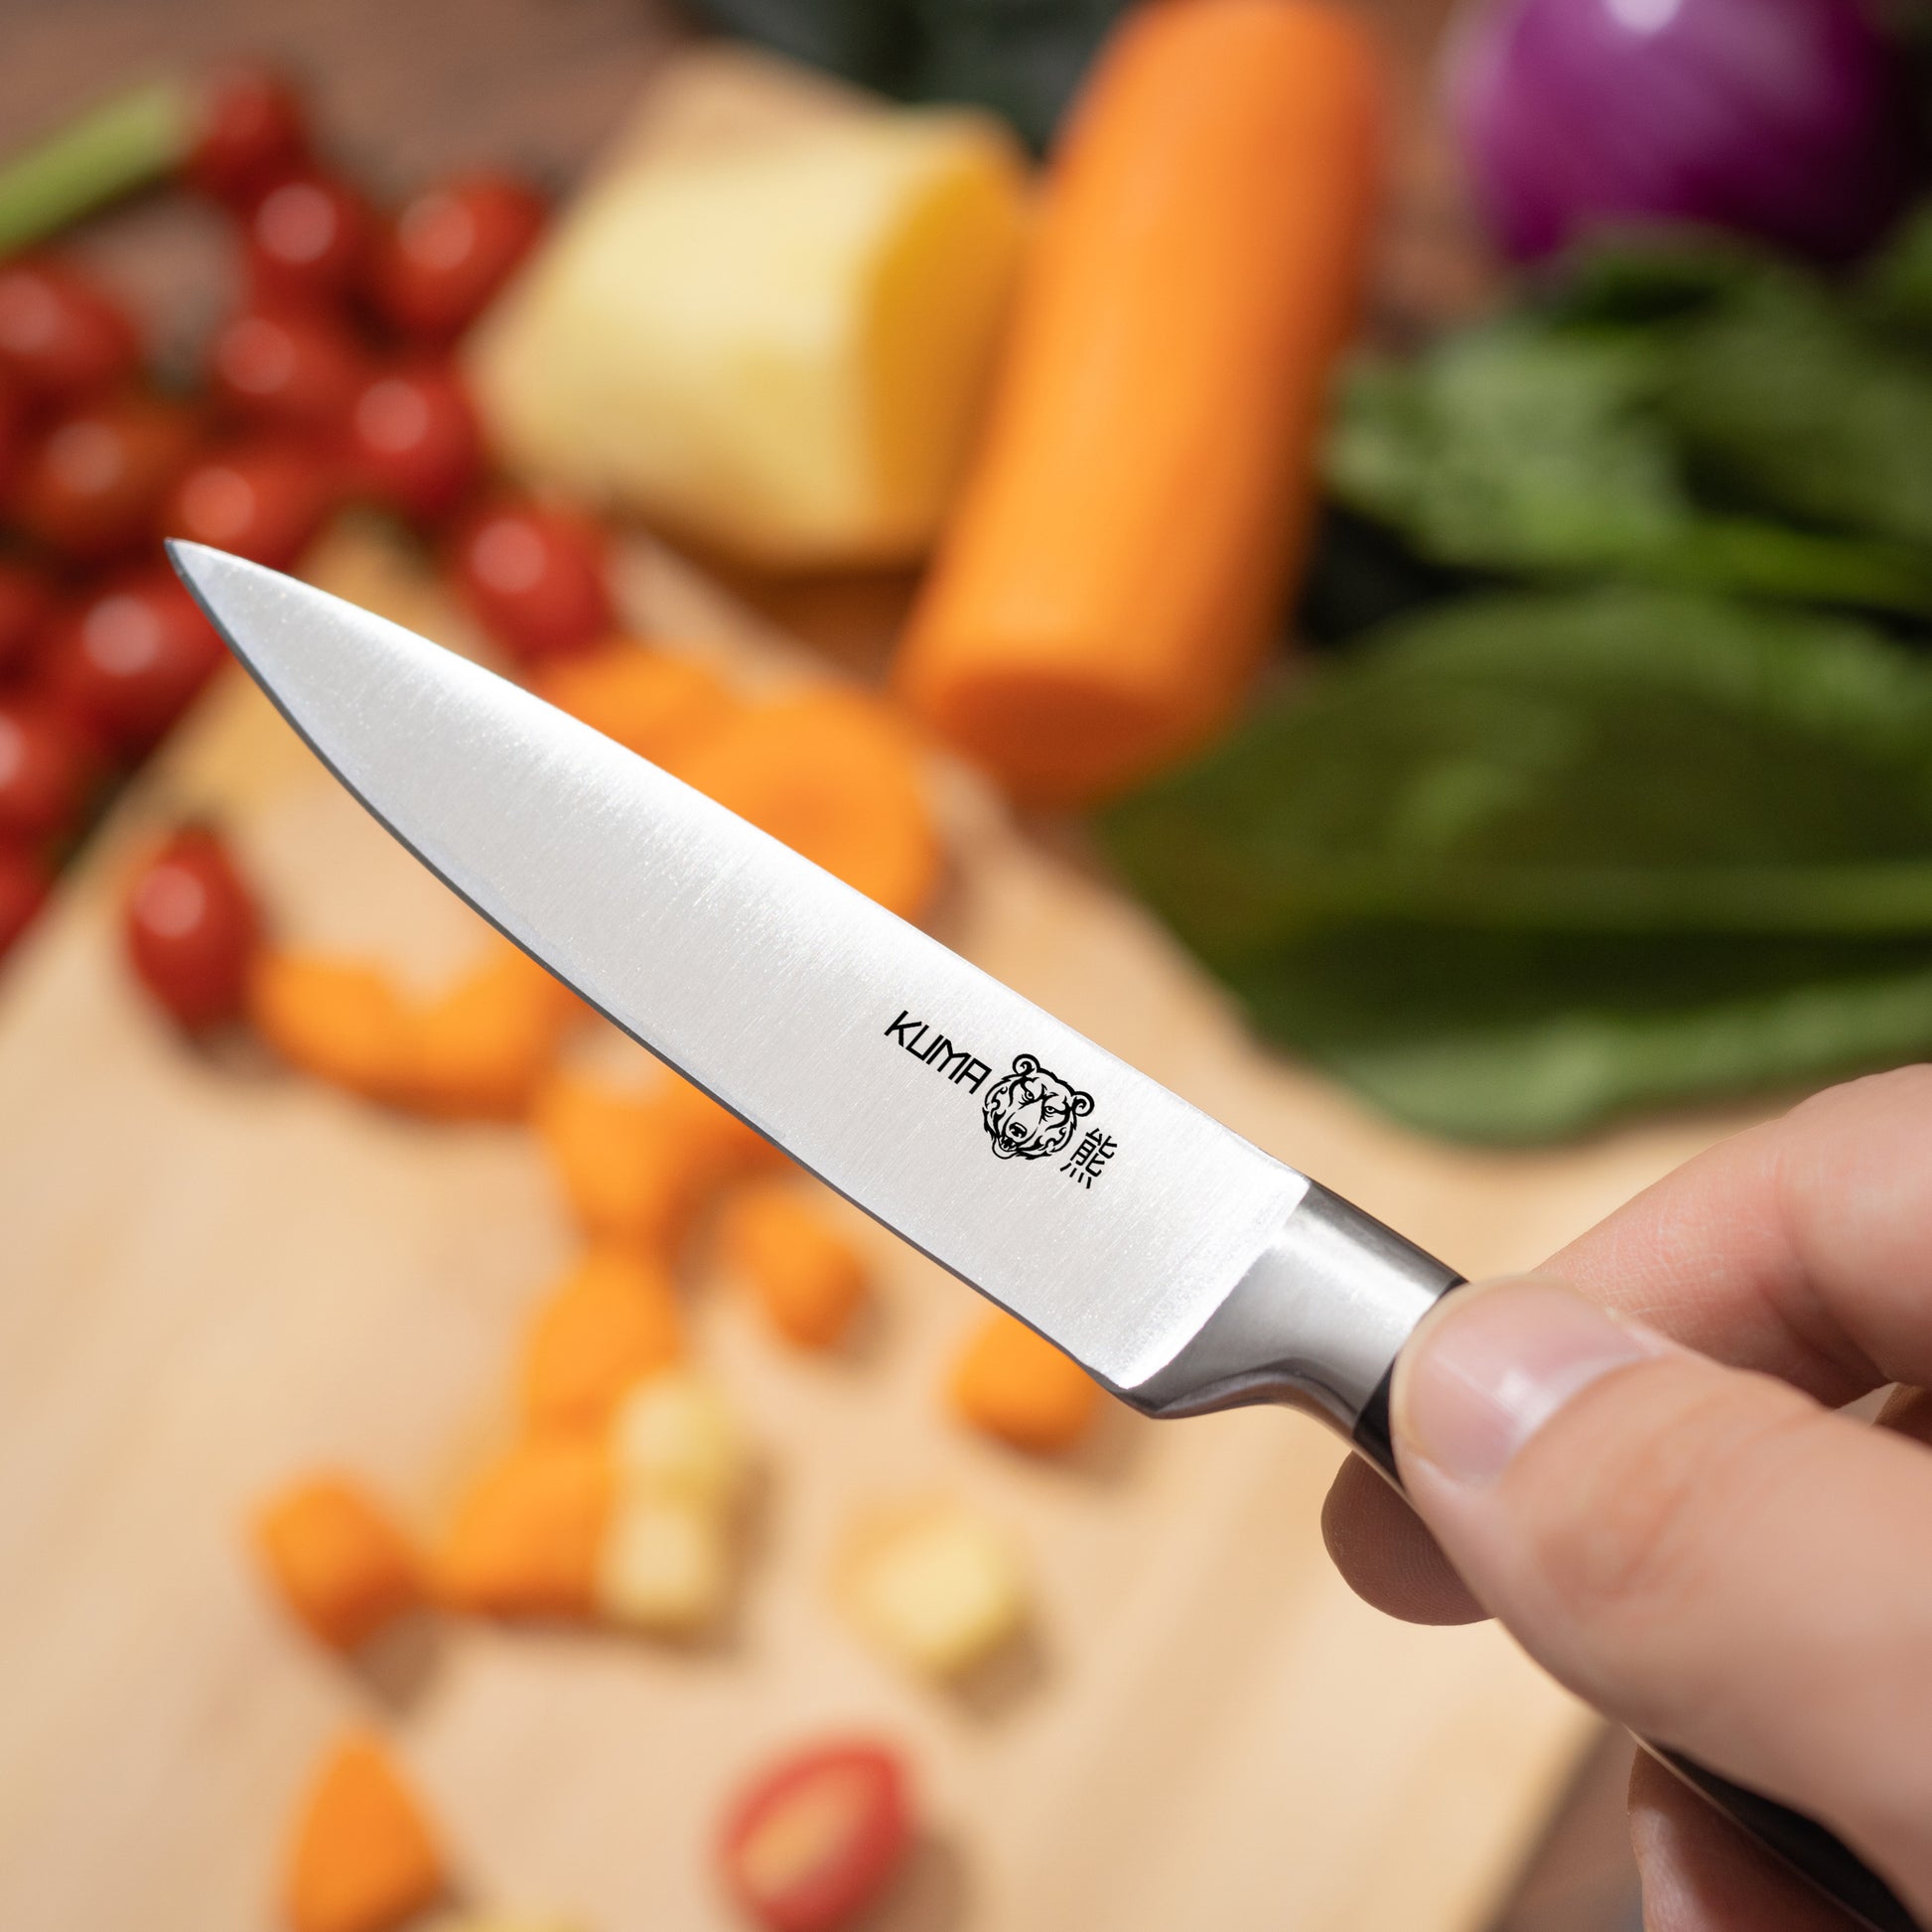 The Best Paring Knives to Buy in 2021